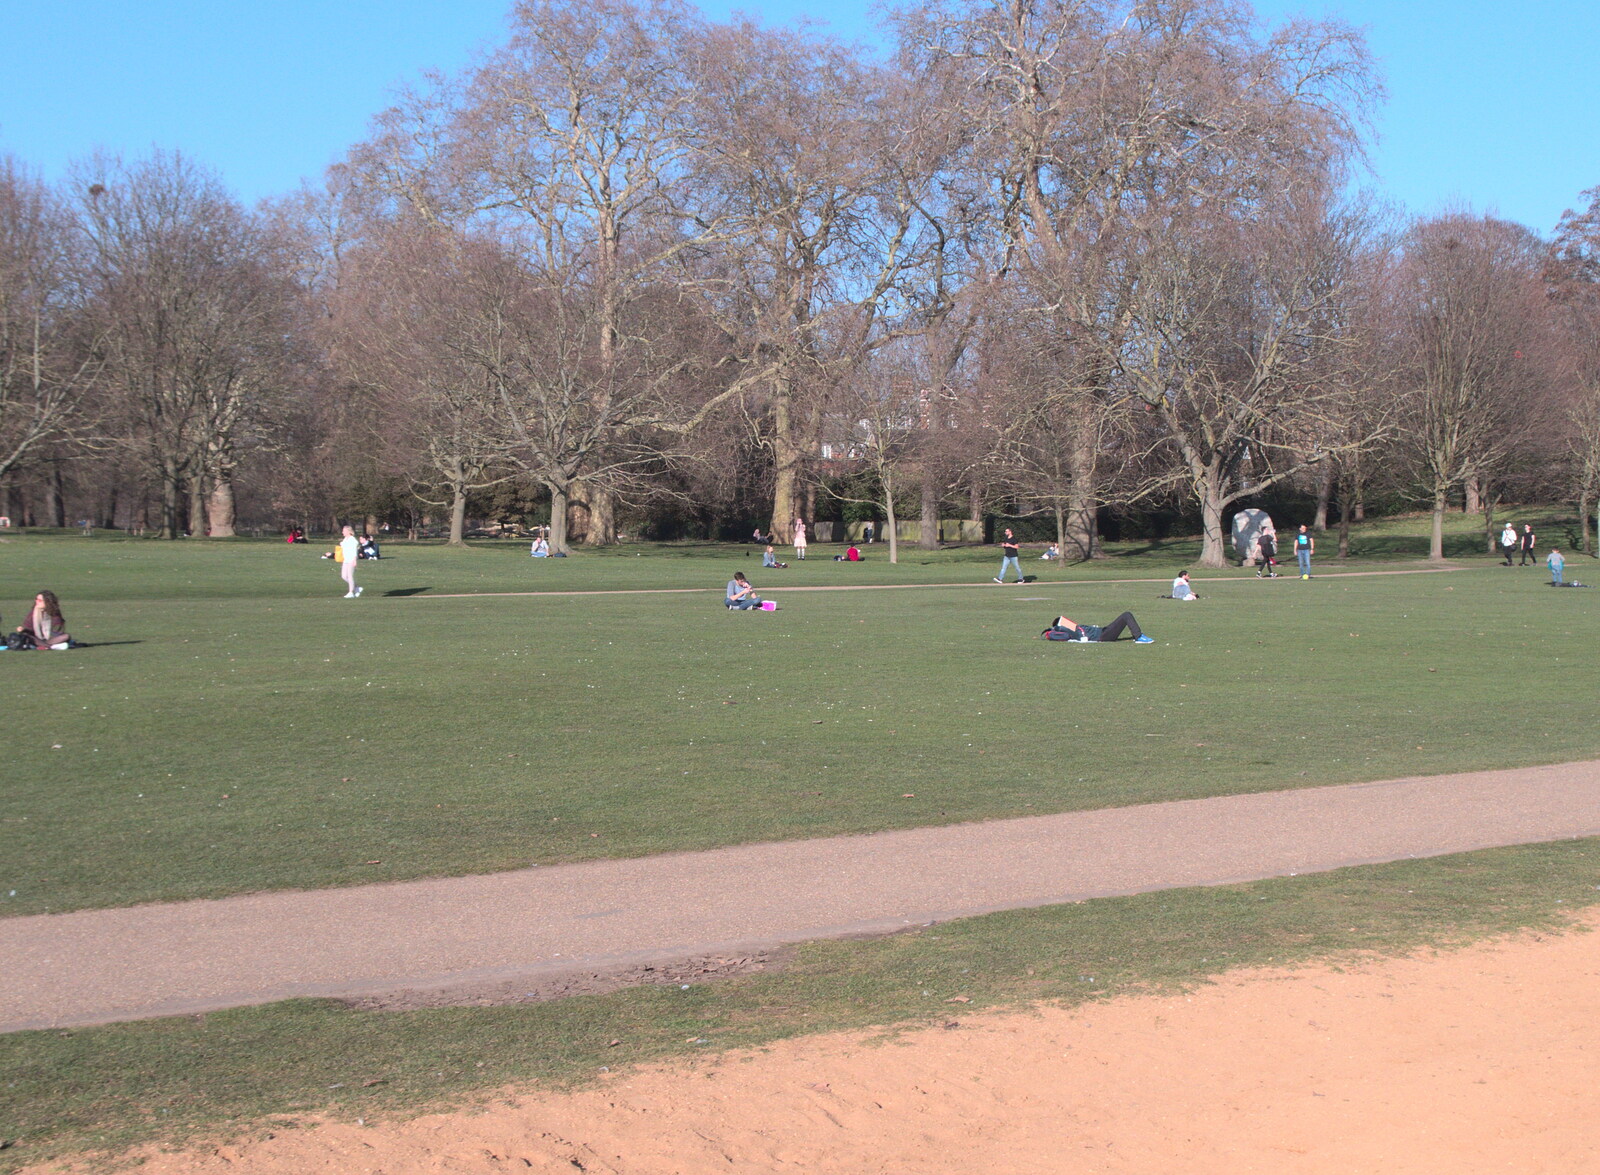 People are actually sunbathing in Hyde Park from SwiftKey Innovation Week, Paddington, London - 27th February 2019